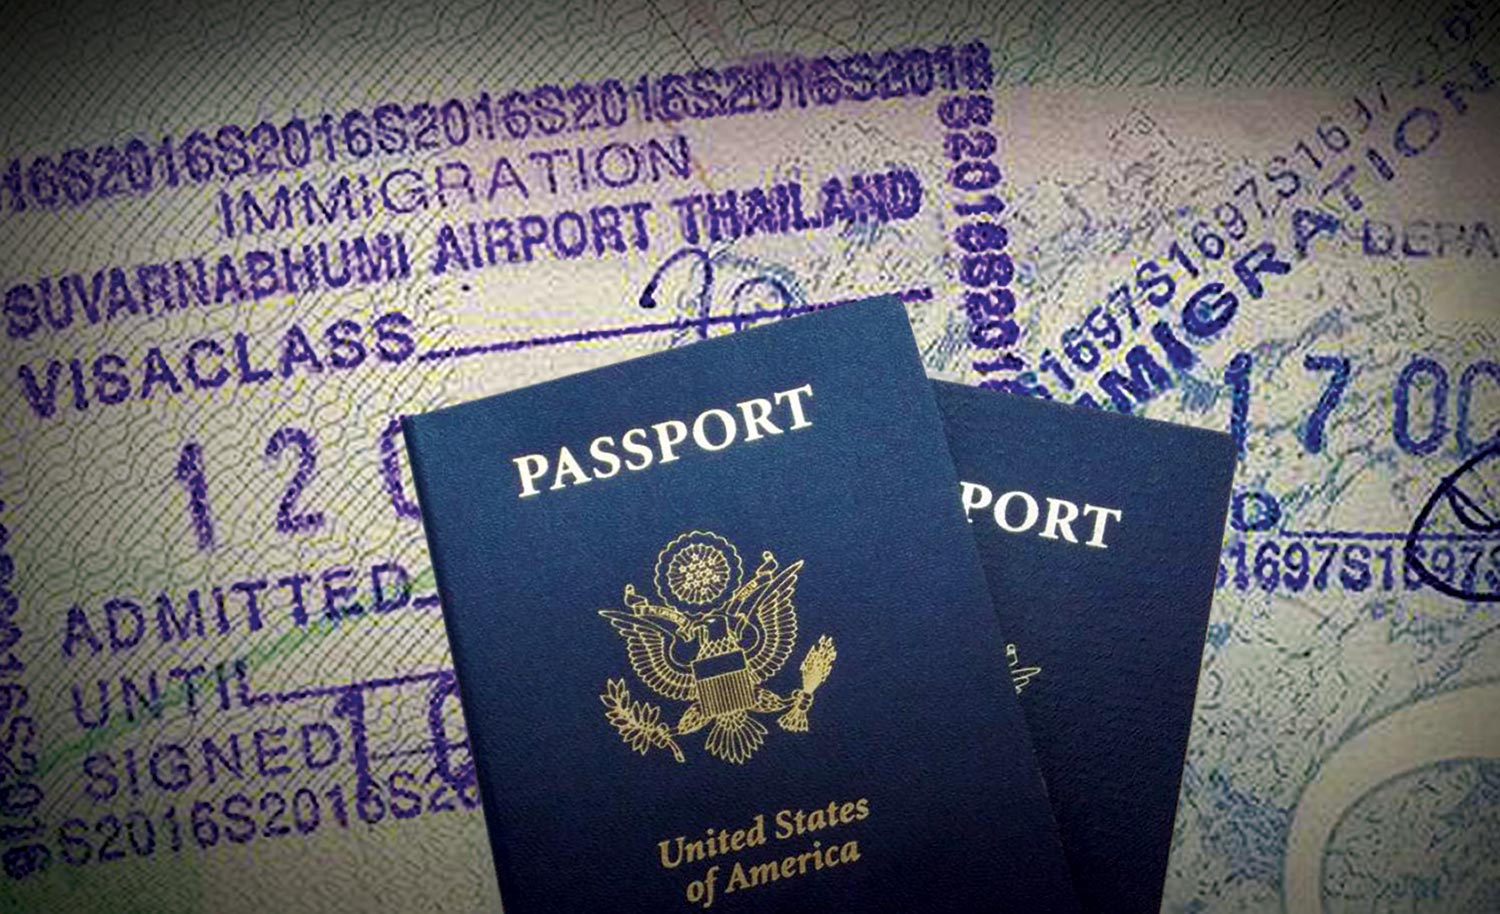 Thailand to Waive Income Tax on News Long-Stay Visa Holders in 2022